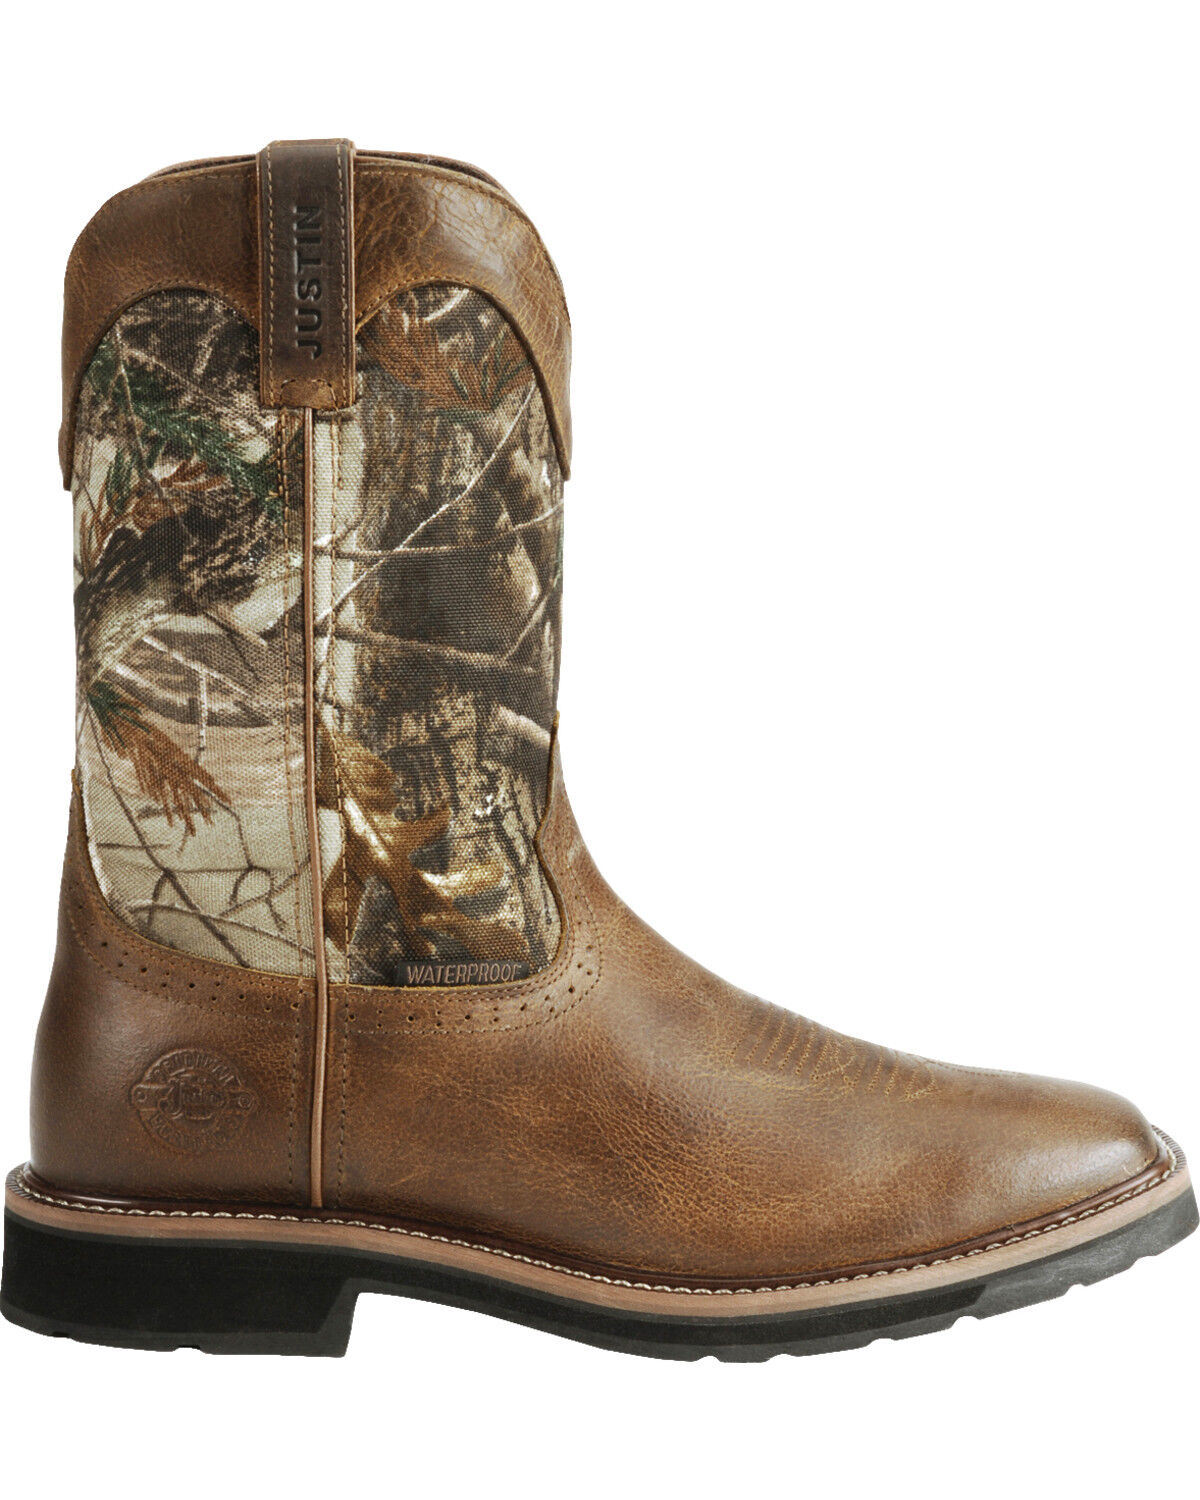 justin boots wk4676